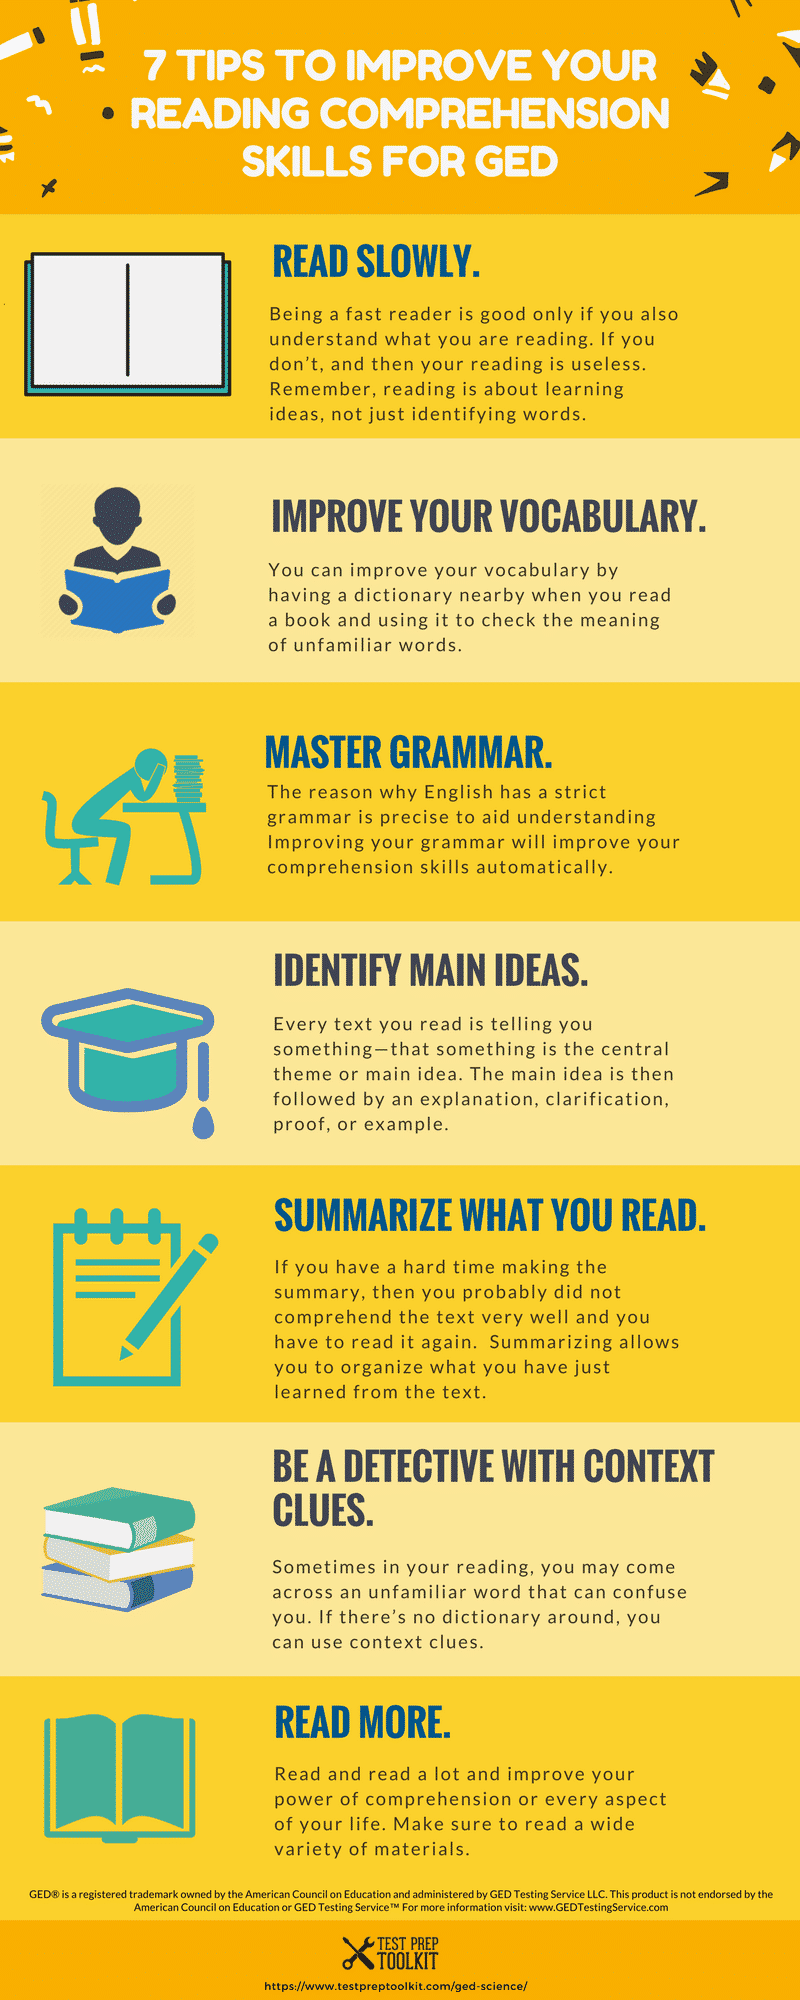 7 Tips To Improve Your Reading Comprehension Skills For Ged